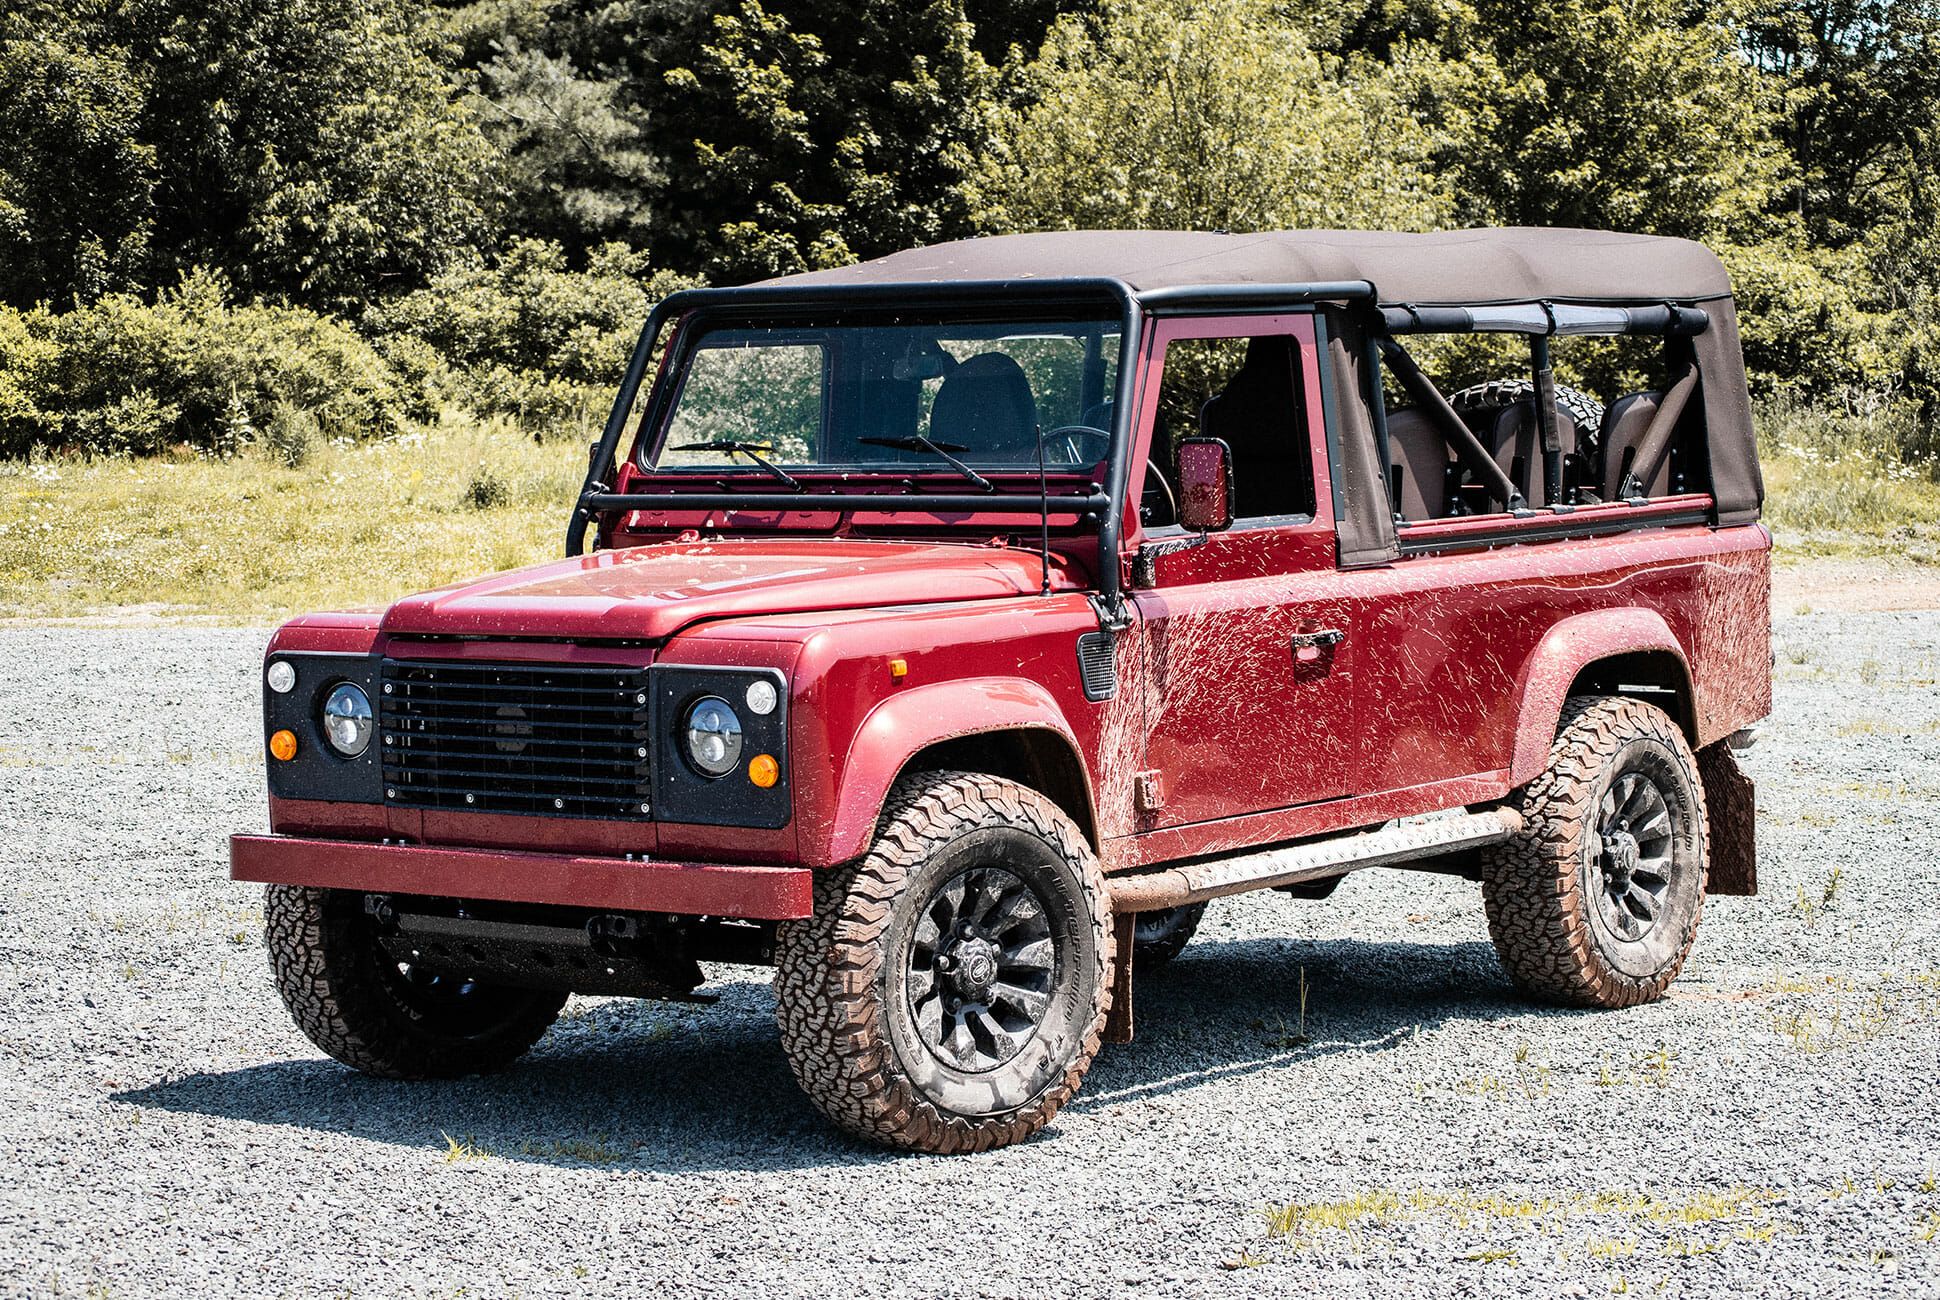 ondersteboven Protestant paraplu No One Should Buy a Classic Land Rover Defender. Here's Why